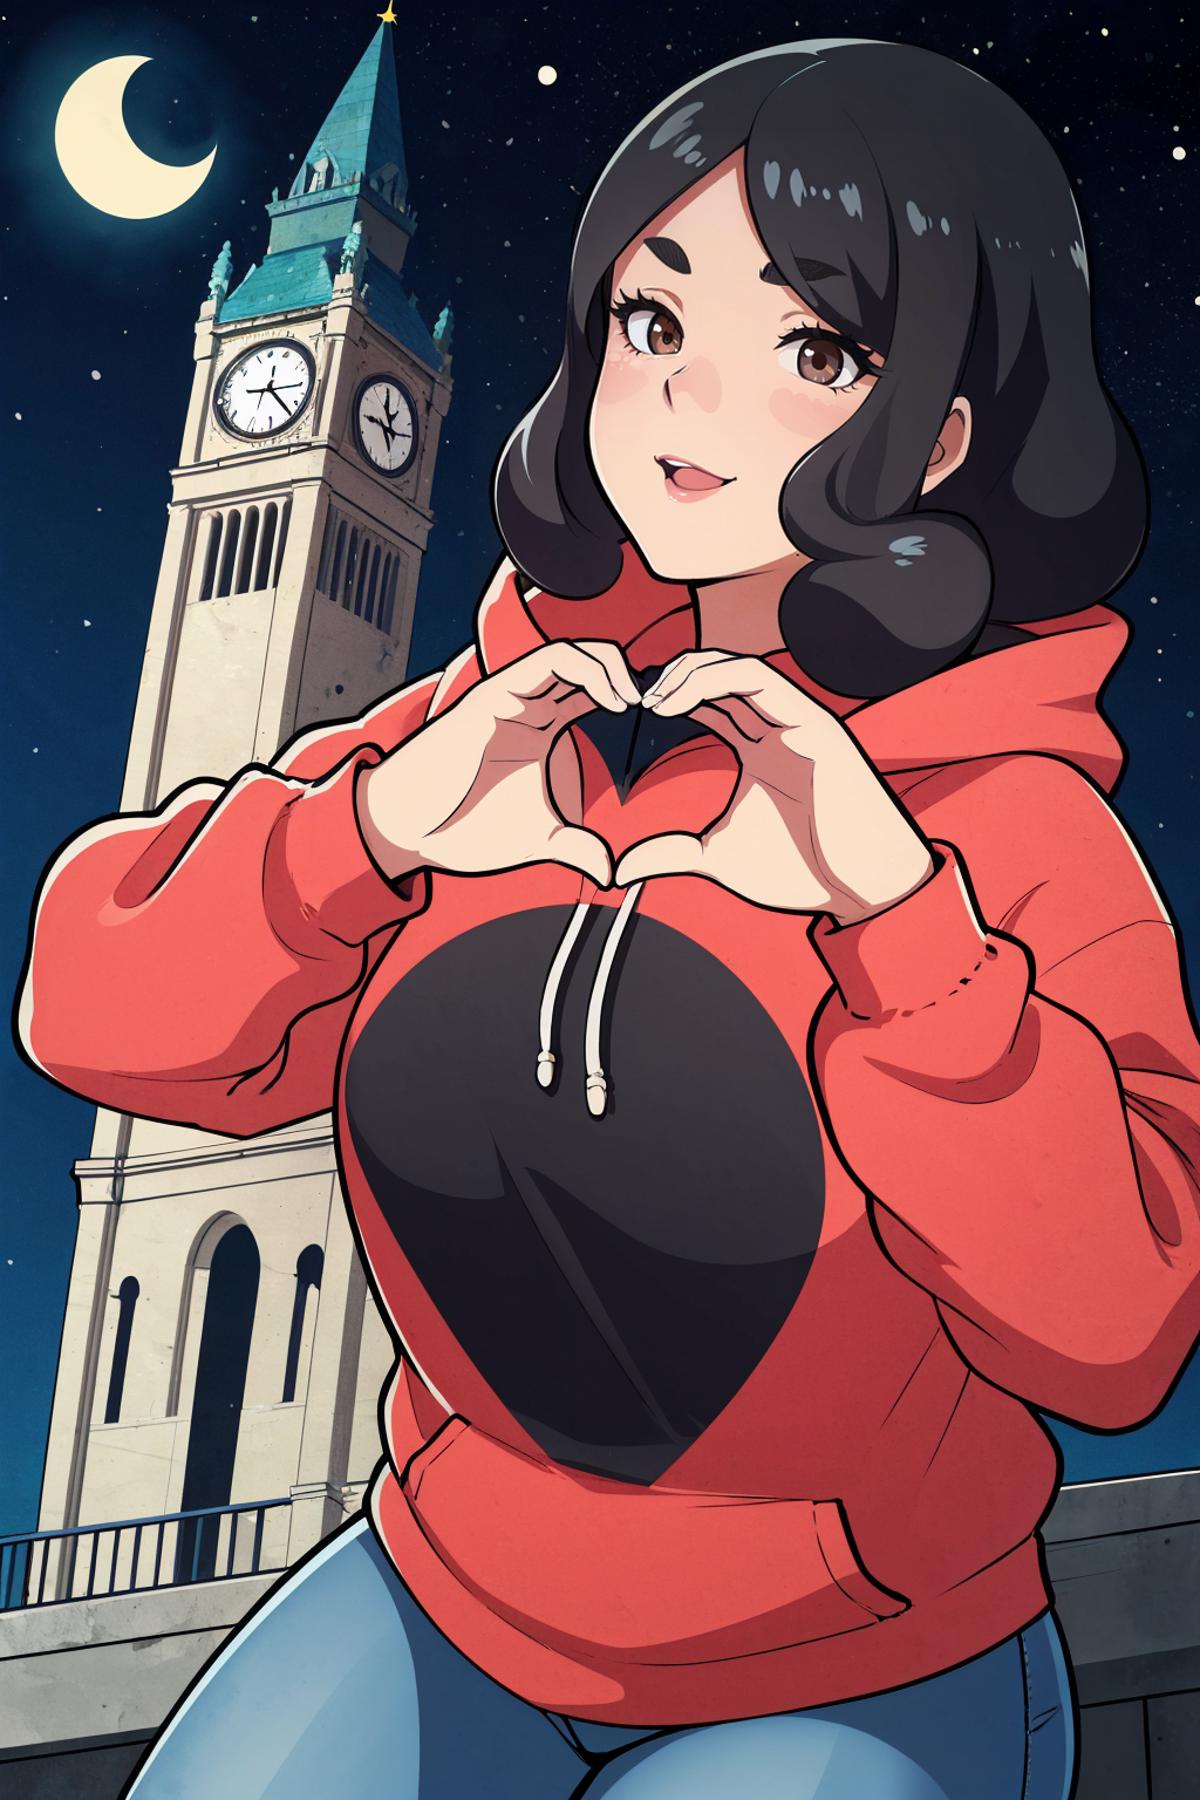 A cartoon drawing of a woman making a heart shape with her hands in front of a clock tower.